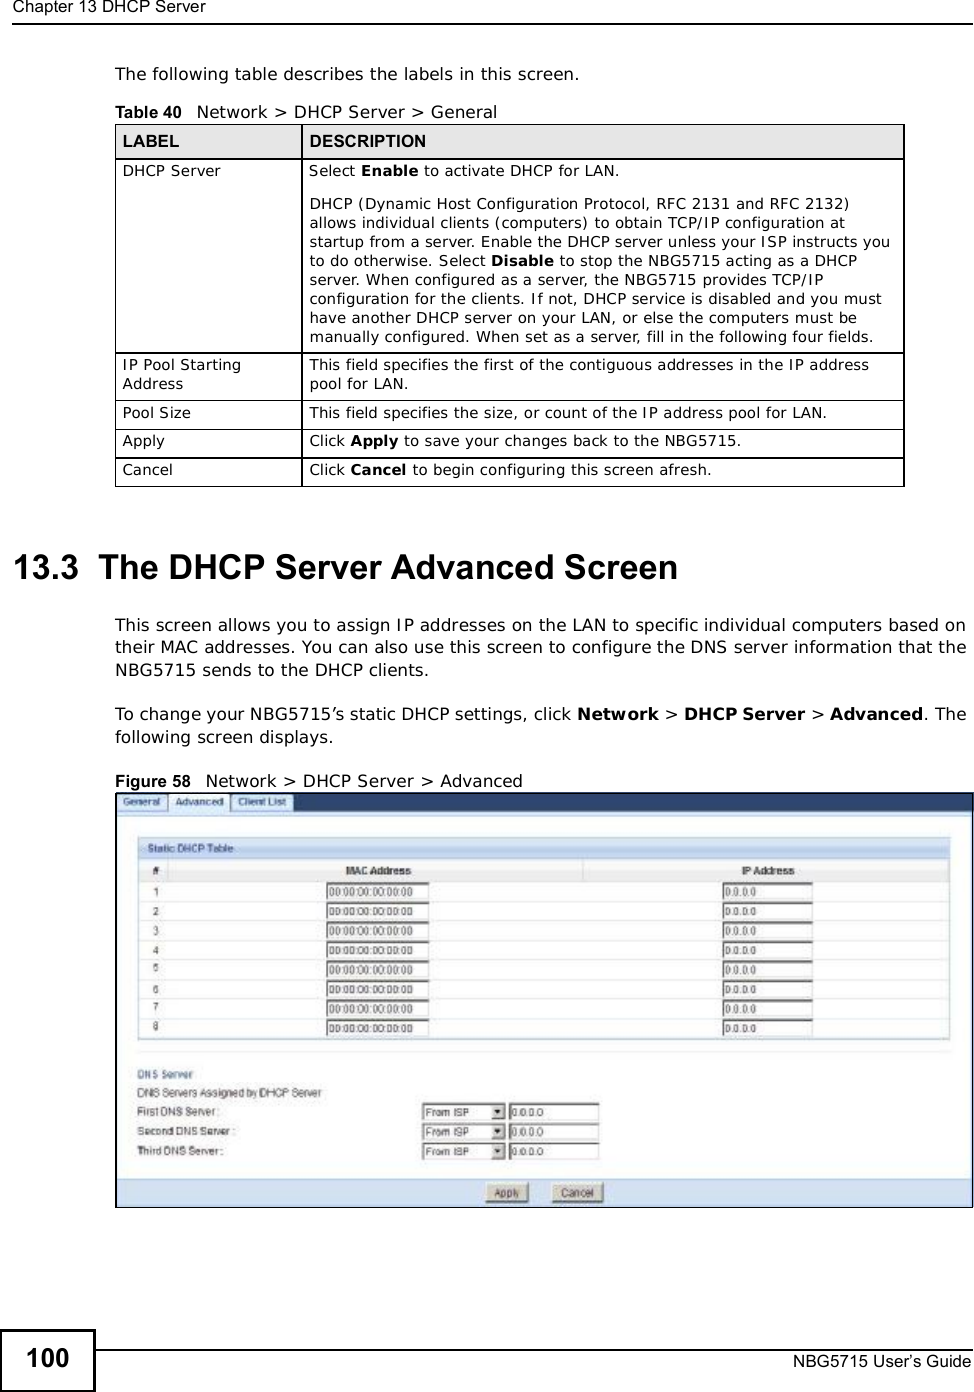 Chapter 13DHCP ServerNBG5715 User’s Guide100The following table describes the labels in this screen.13.3  The DHCP Server Advanced ScreenThis screen allows you to assign IP addresses on the LAN to specific individual computers based on their MAC addresses. You can also use this screen to configure the DNS server information that the NBG5715 sends to the DHCP clients.To change your NBG5715’s static DHCP settings, click Network &gt; DHCP Server &gt; Advanced. The following screen displays.Figure 58   Network &gt; DHCP Server &gt; Advanced Table 40   Network &gt; DHCP Server &gt; General LABEL DESCRIPTIONDHCP ServerSelect Enable to activate DHCP for LAN.DHCP (Dynamic Host Configuration Protocol, RFC 2131 and RFC 2132) allows individual clients (computers) to obtain TCP/IP configuration at startup from a server. Enable the DHCP server unless your ISP instructs you to do otherwise. Select Disable to stop the NBG5715 acting as a DHCP server. When configured as a server, the NBG5715 provides TCP/IP configuration for the clients. If not, DHCP service is disabled and you must have another DHCP server on your LAN, or else the computers must be manually configured. When set as a server, fill in the following four fields.IP Pool Starting Address This field specifies the first of the contiguous addresses in the IP address pool for LAN.Pool Size This field specifies the size, or count of the IP address pool for LAN.Apply Click Apply to save your changes back to the NBG5715.Cancel Click Cancel to begin configuring this screen afresh.